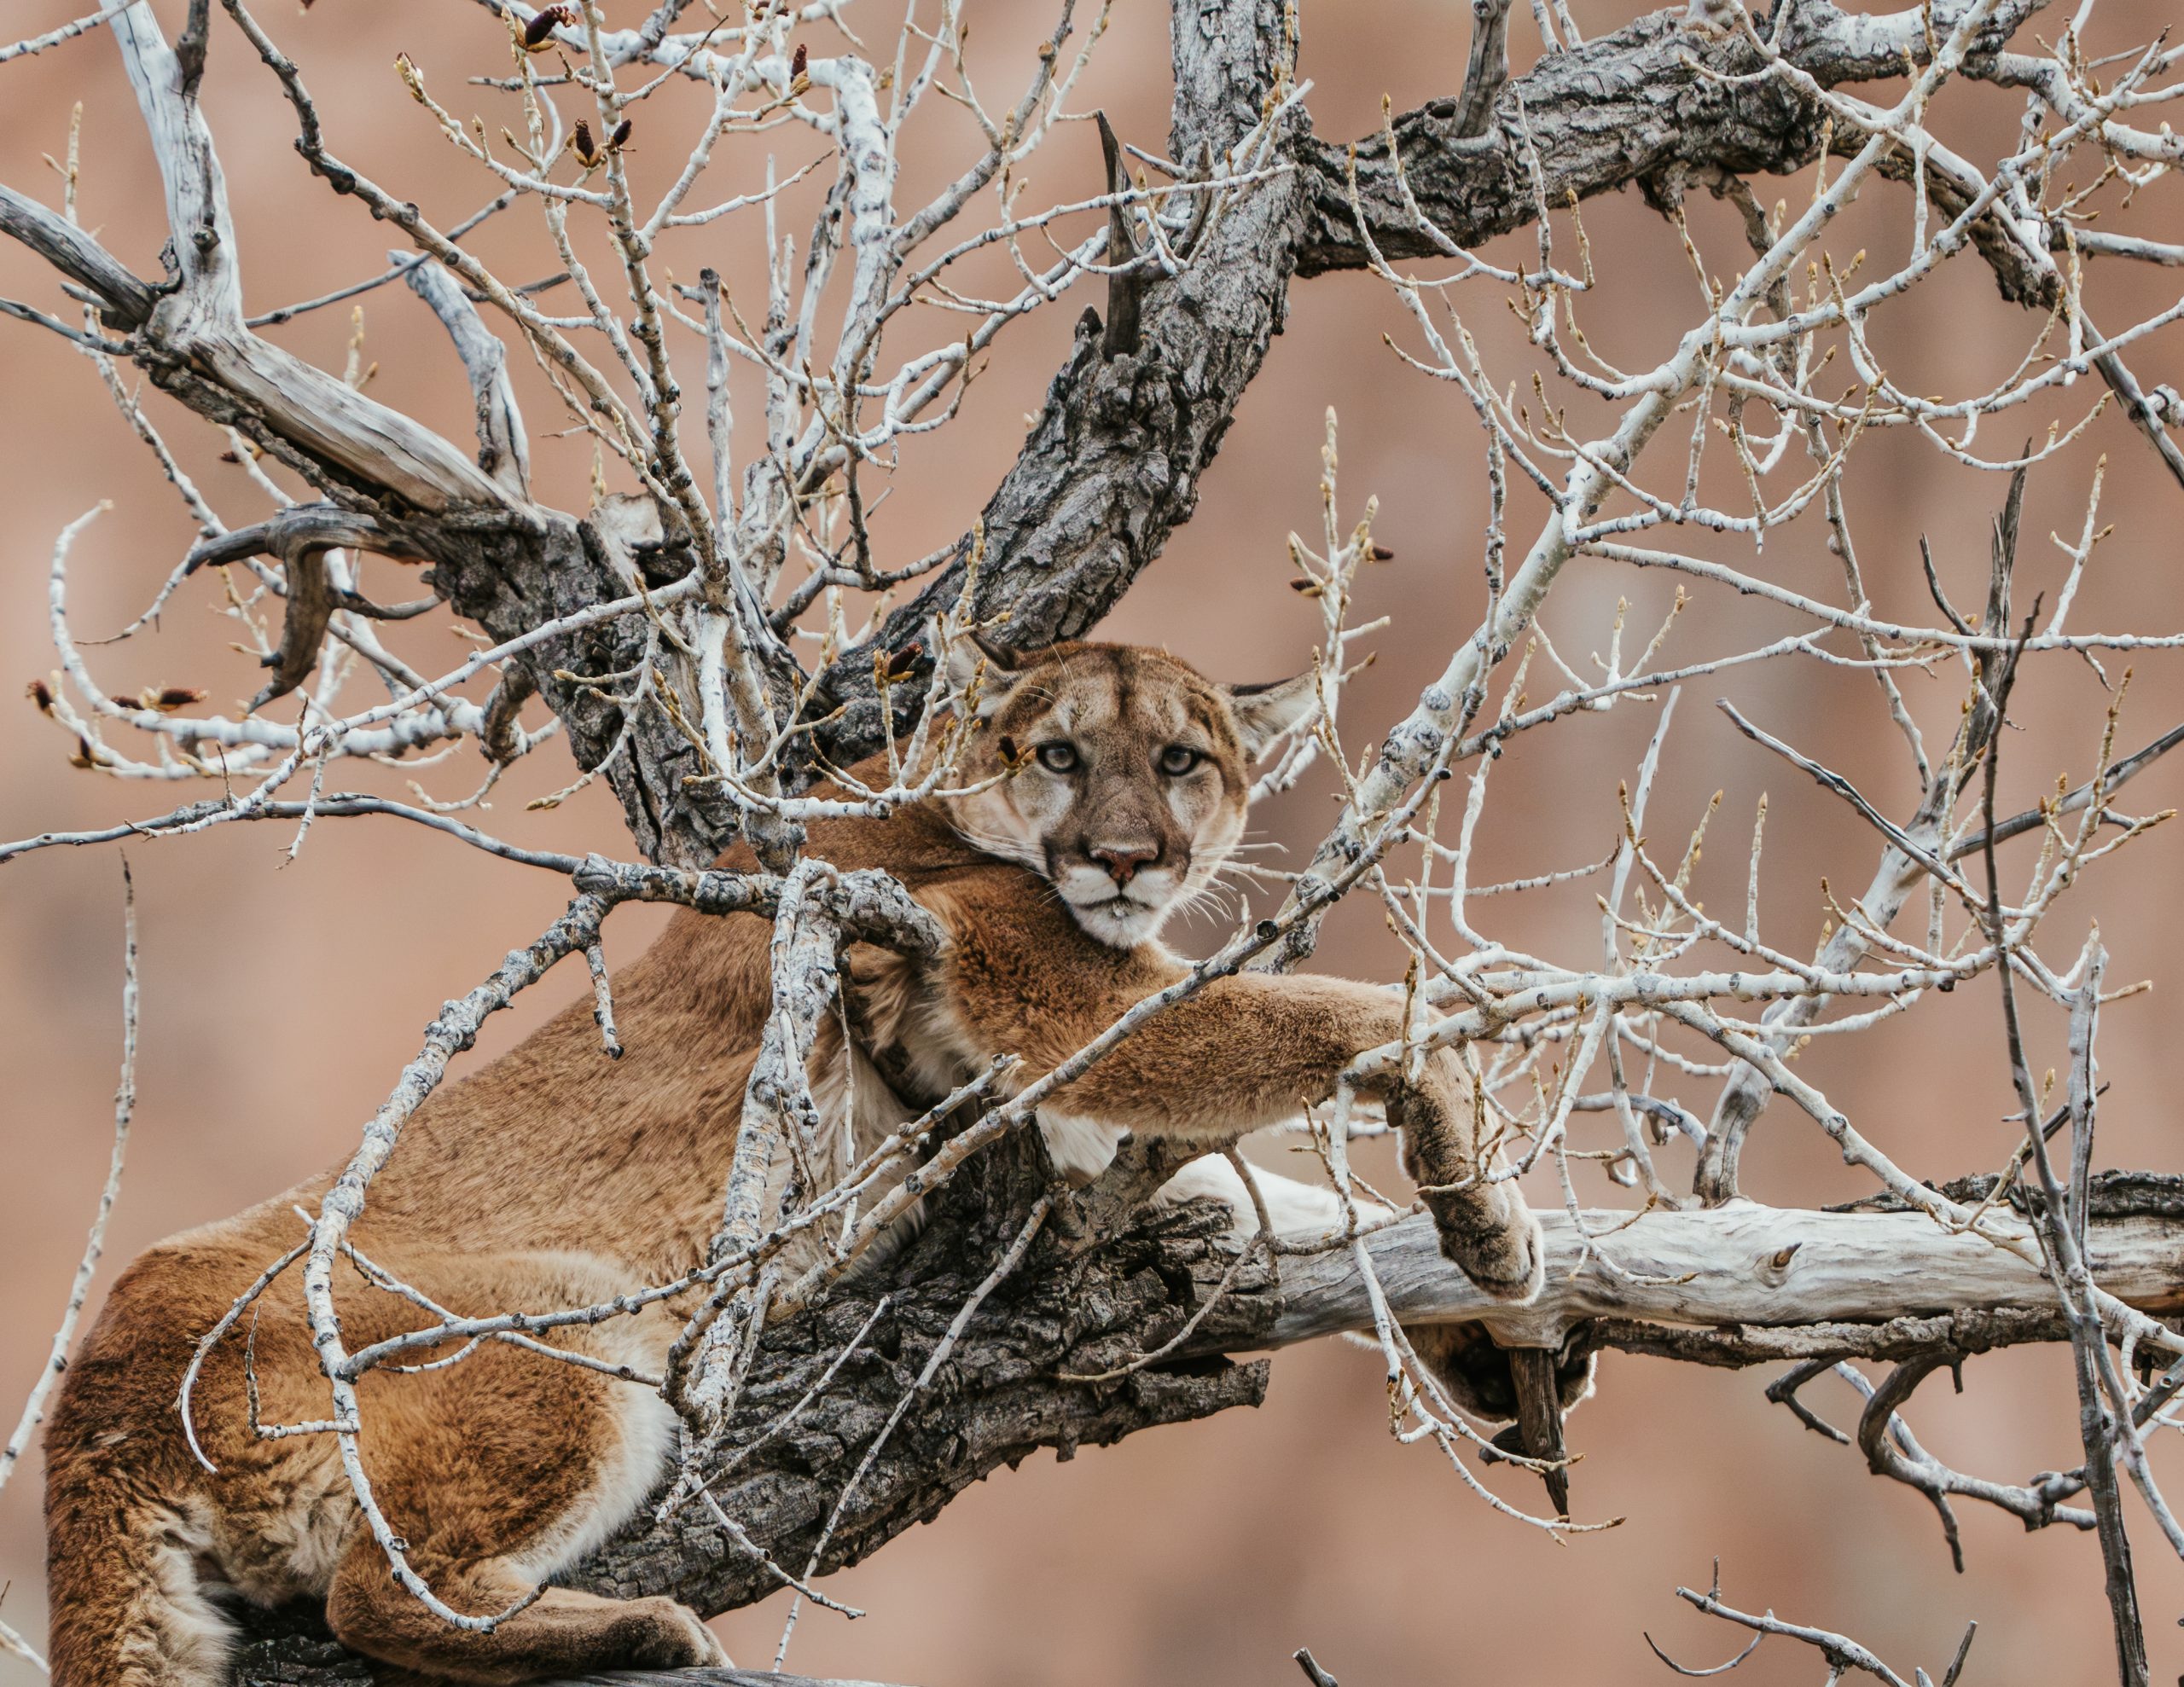 Paralyzed mountain lion found in Colorado is first case of “staggering disease” in North America